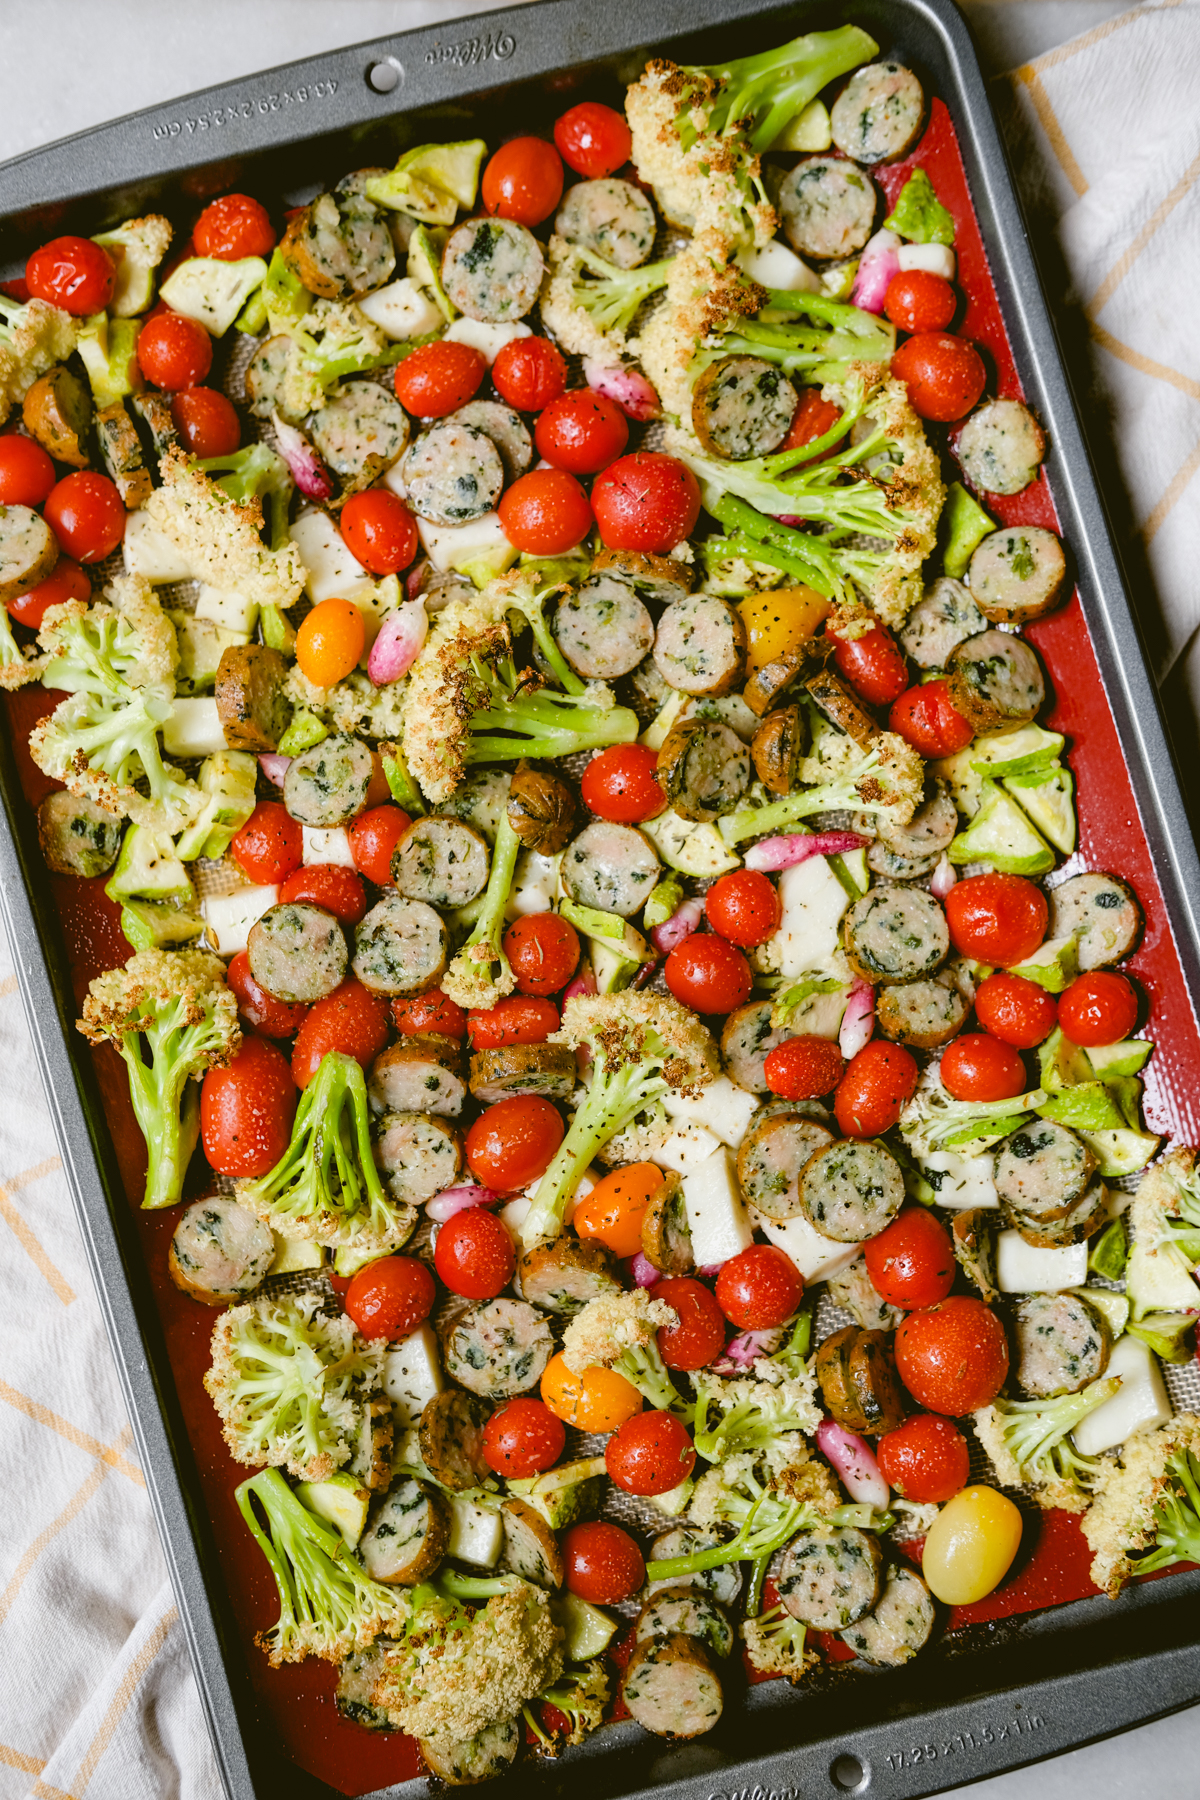 How to Make Sheet Pan Meals {Easy Formula!} - FeelGoodFoodie